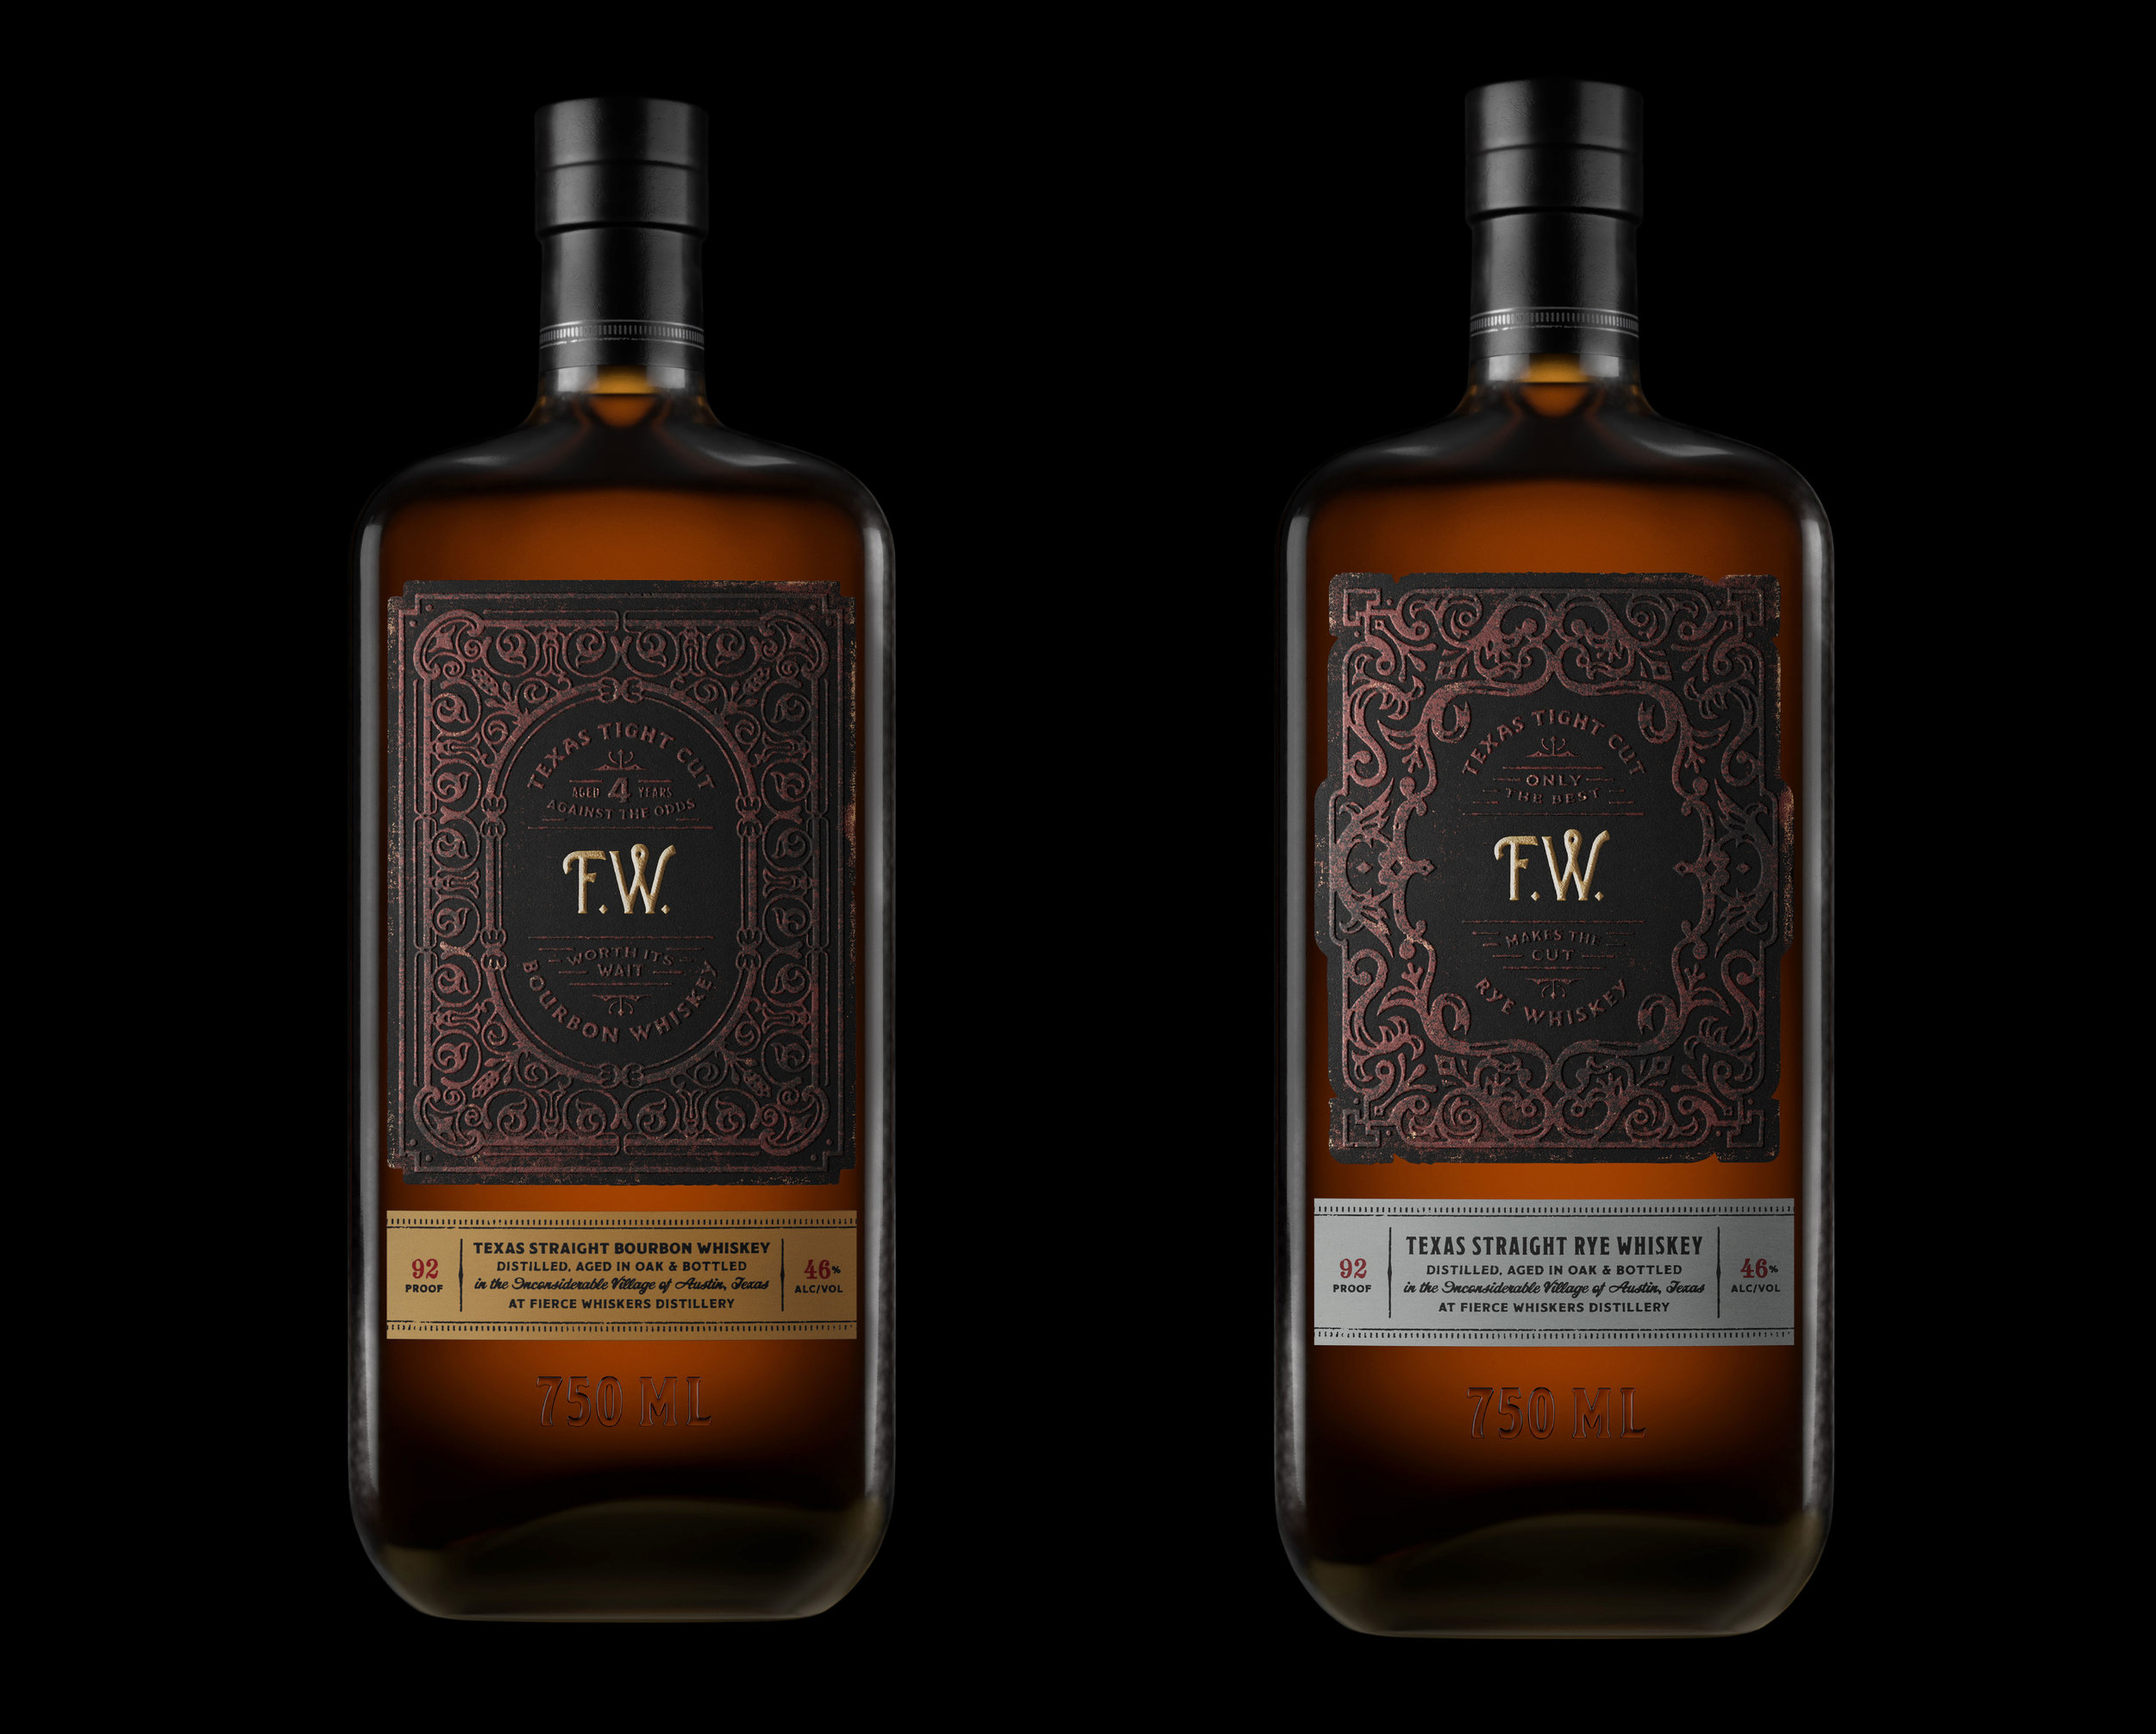 169-Year-Old Journal Entry Inspires Premium Whiskey for Fierce Whiskers Distillery